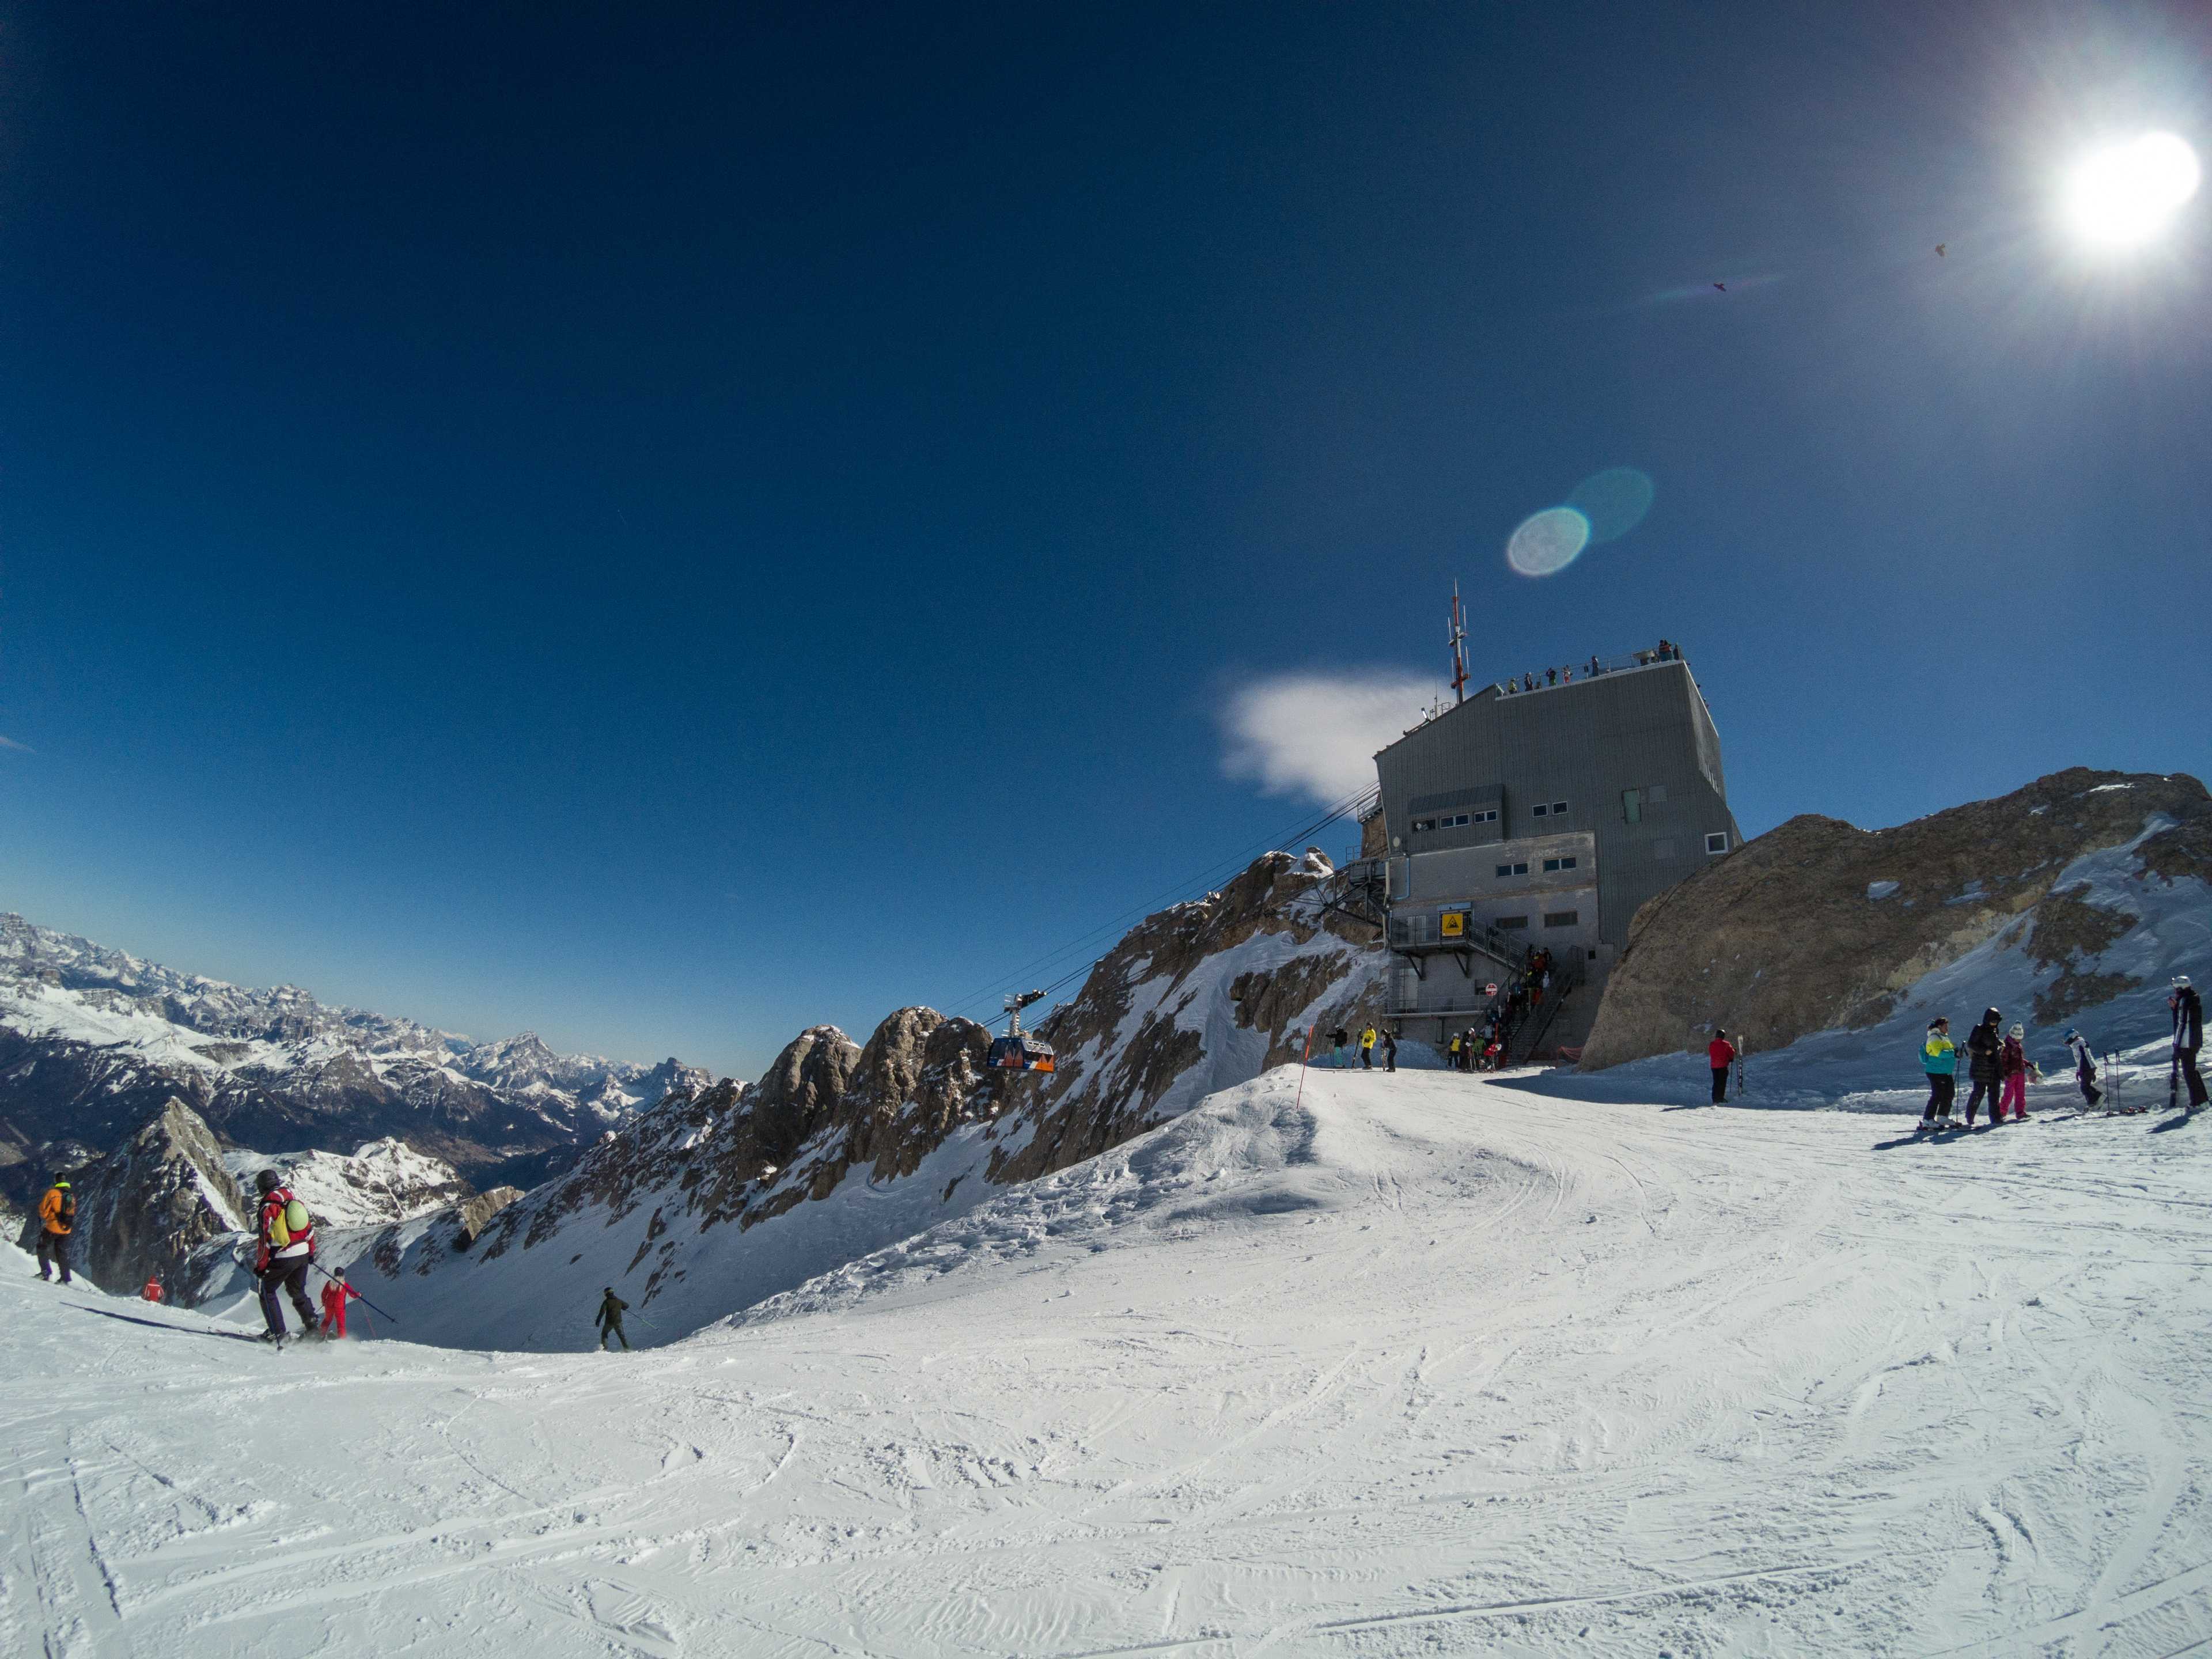 The cable car station on the top of Marmolada